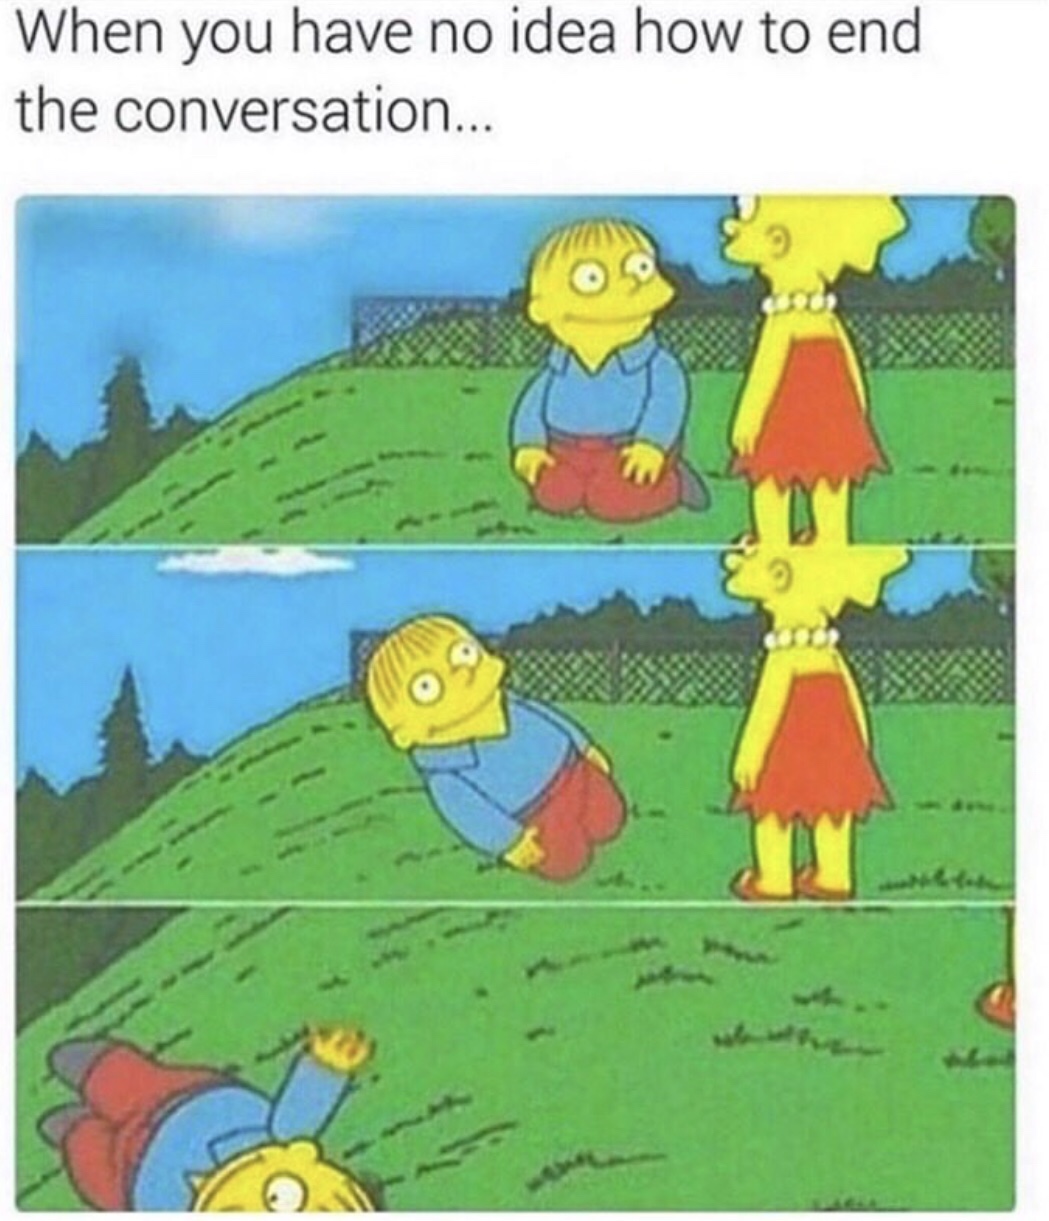 funny meme about awkward small talk meme - When you have no idea how to end the conversation...